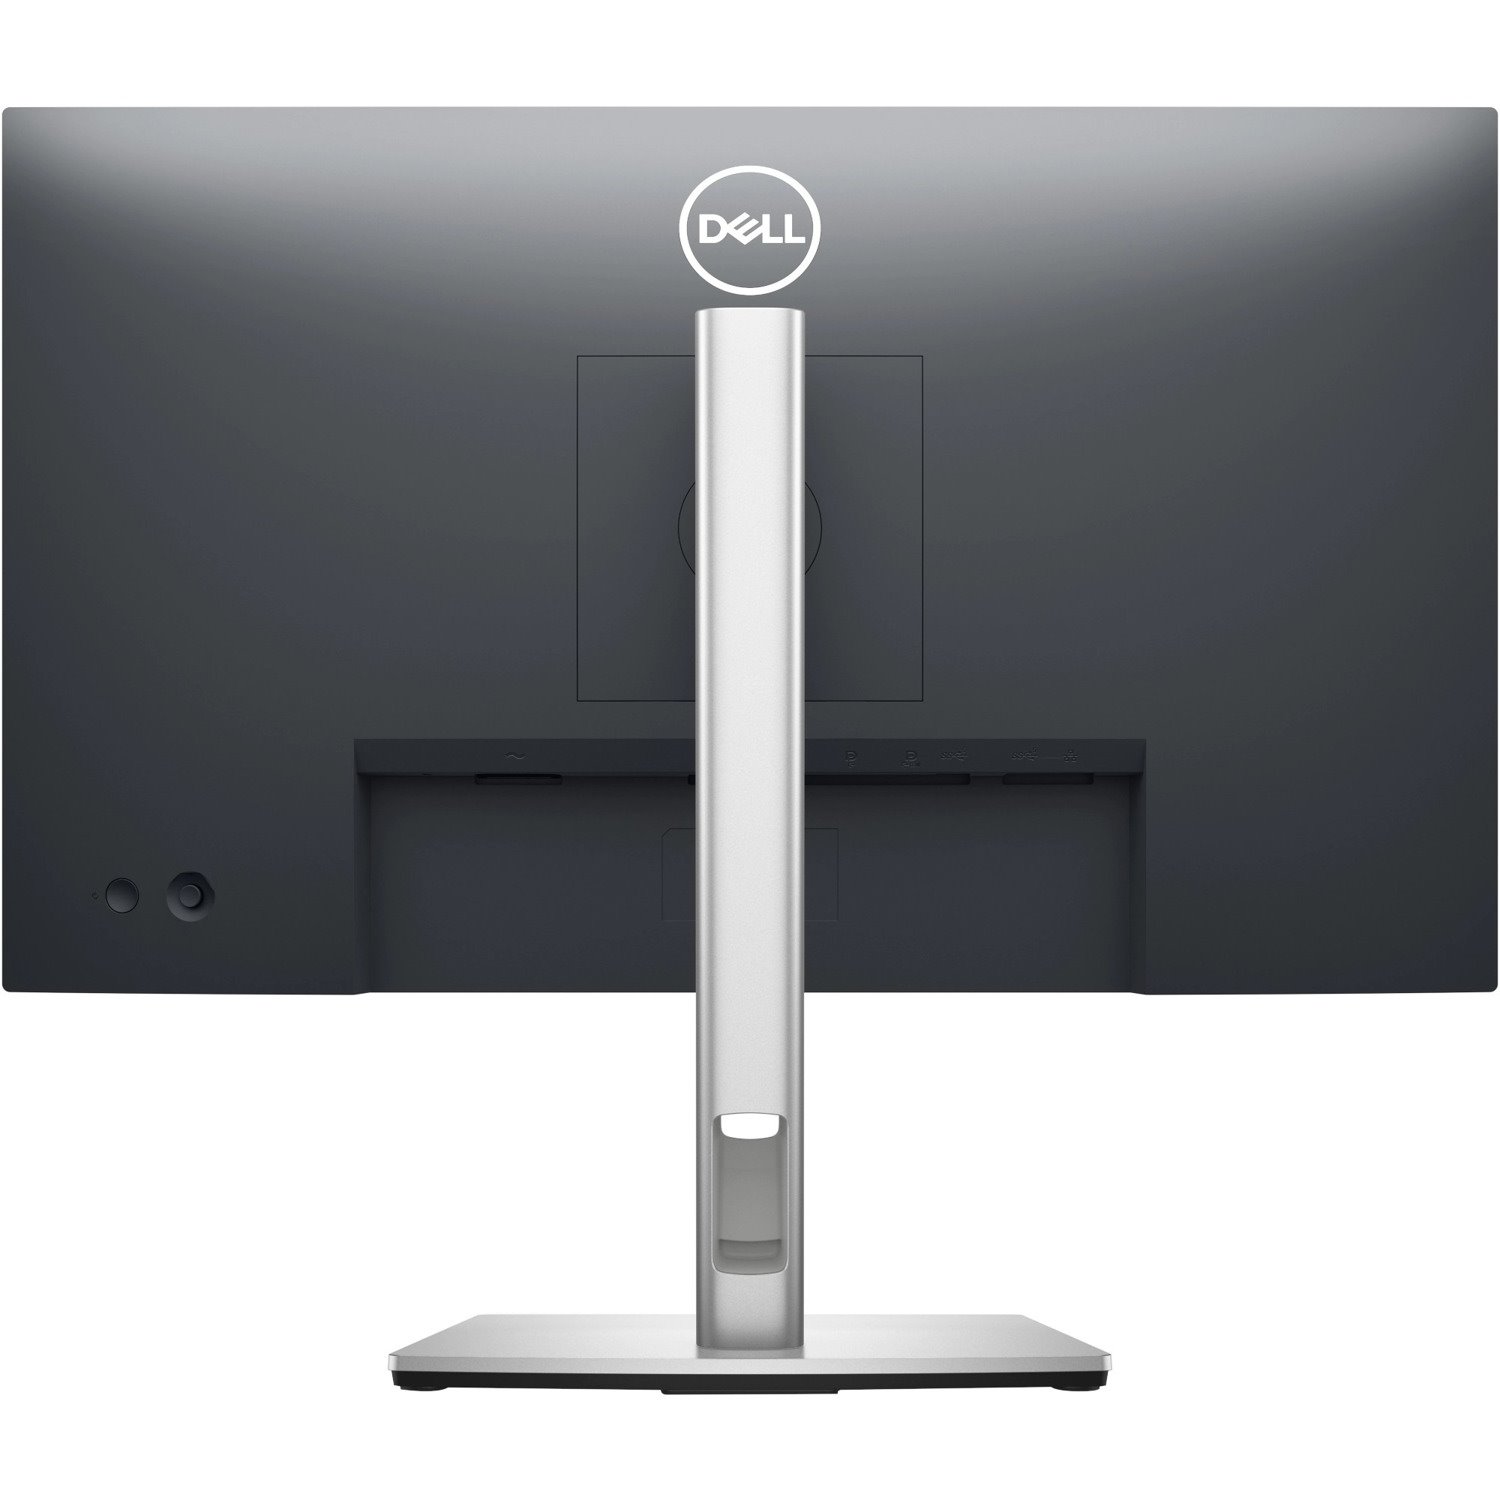 Dell P2422HE 23.8" Full HD WLED LCD Monitor - 16:9 - Black, Silver